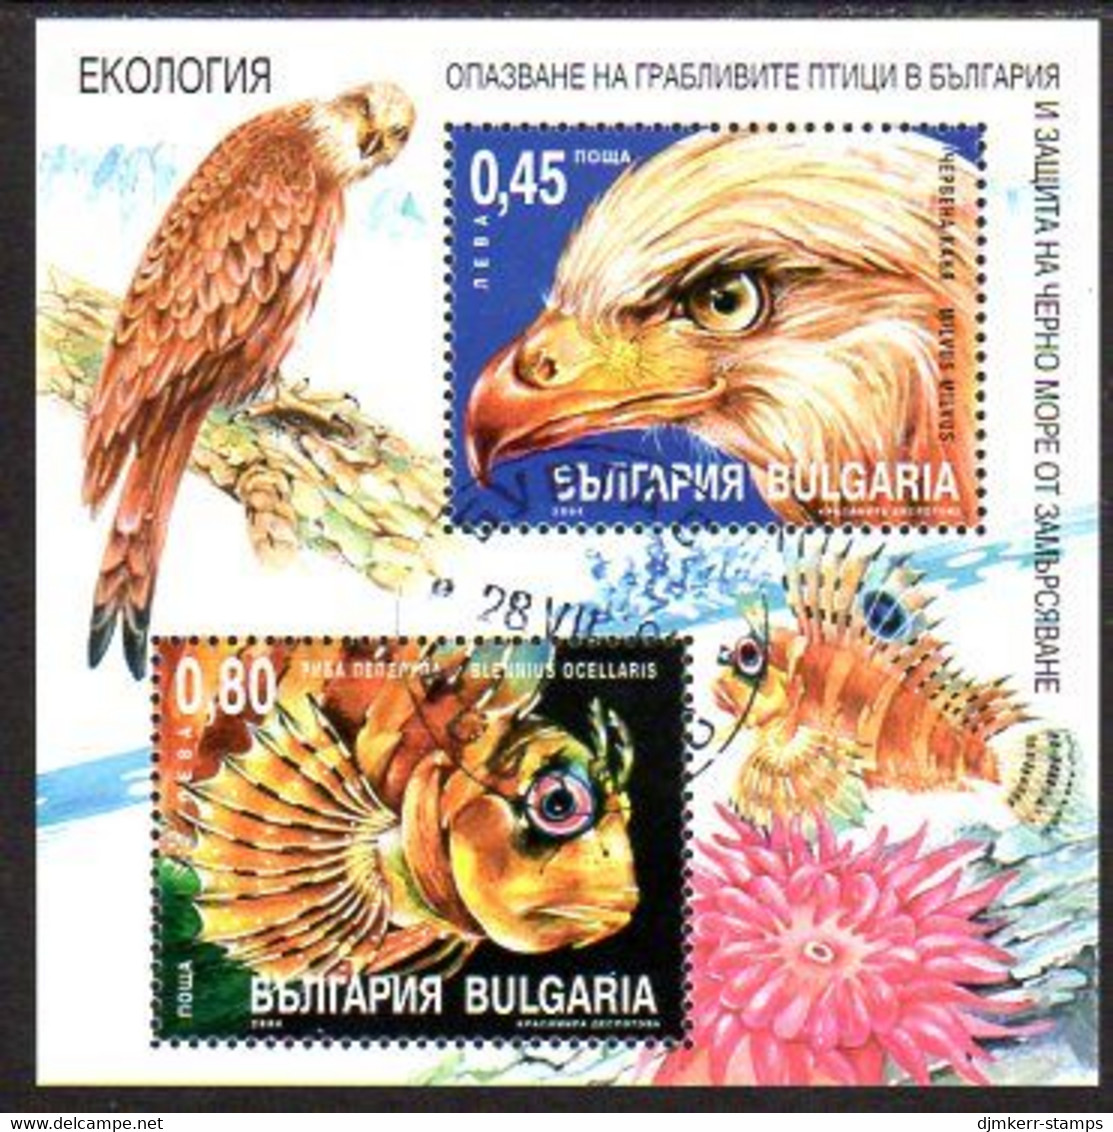 BULGARIA 2004 Nature Protection Block Used.  Michel Block 267 - Used Stamps